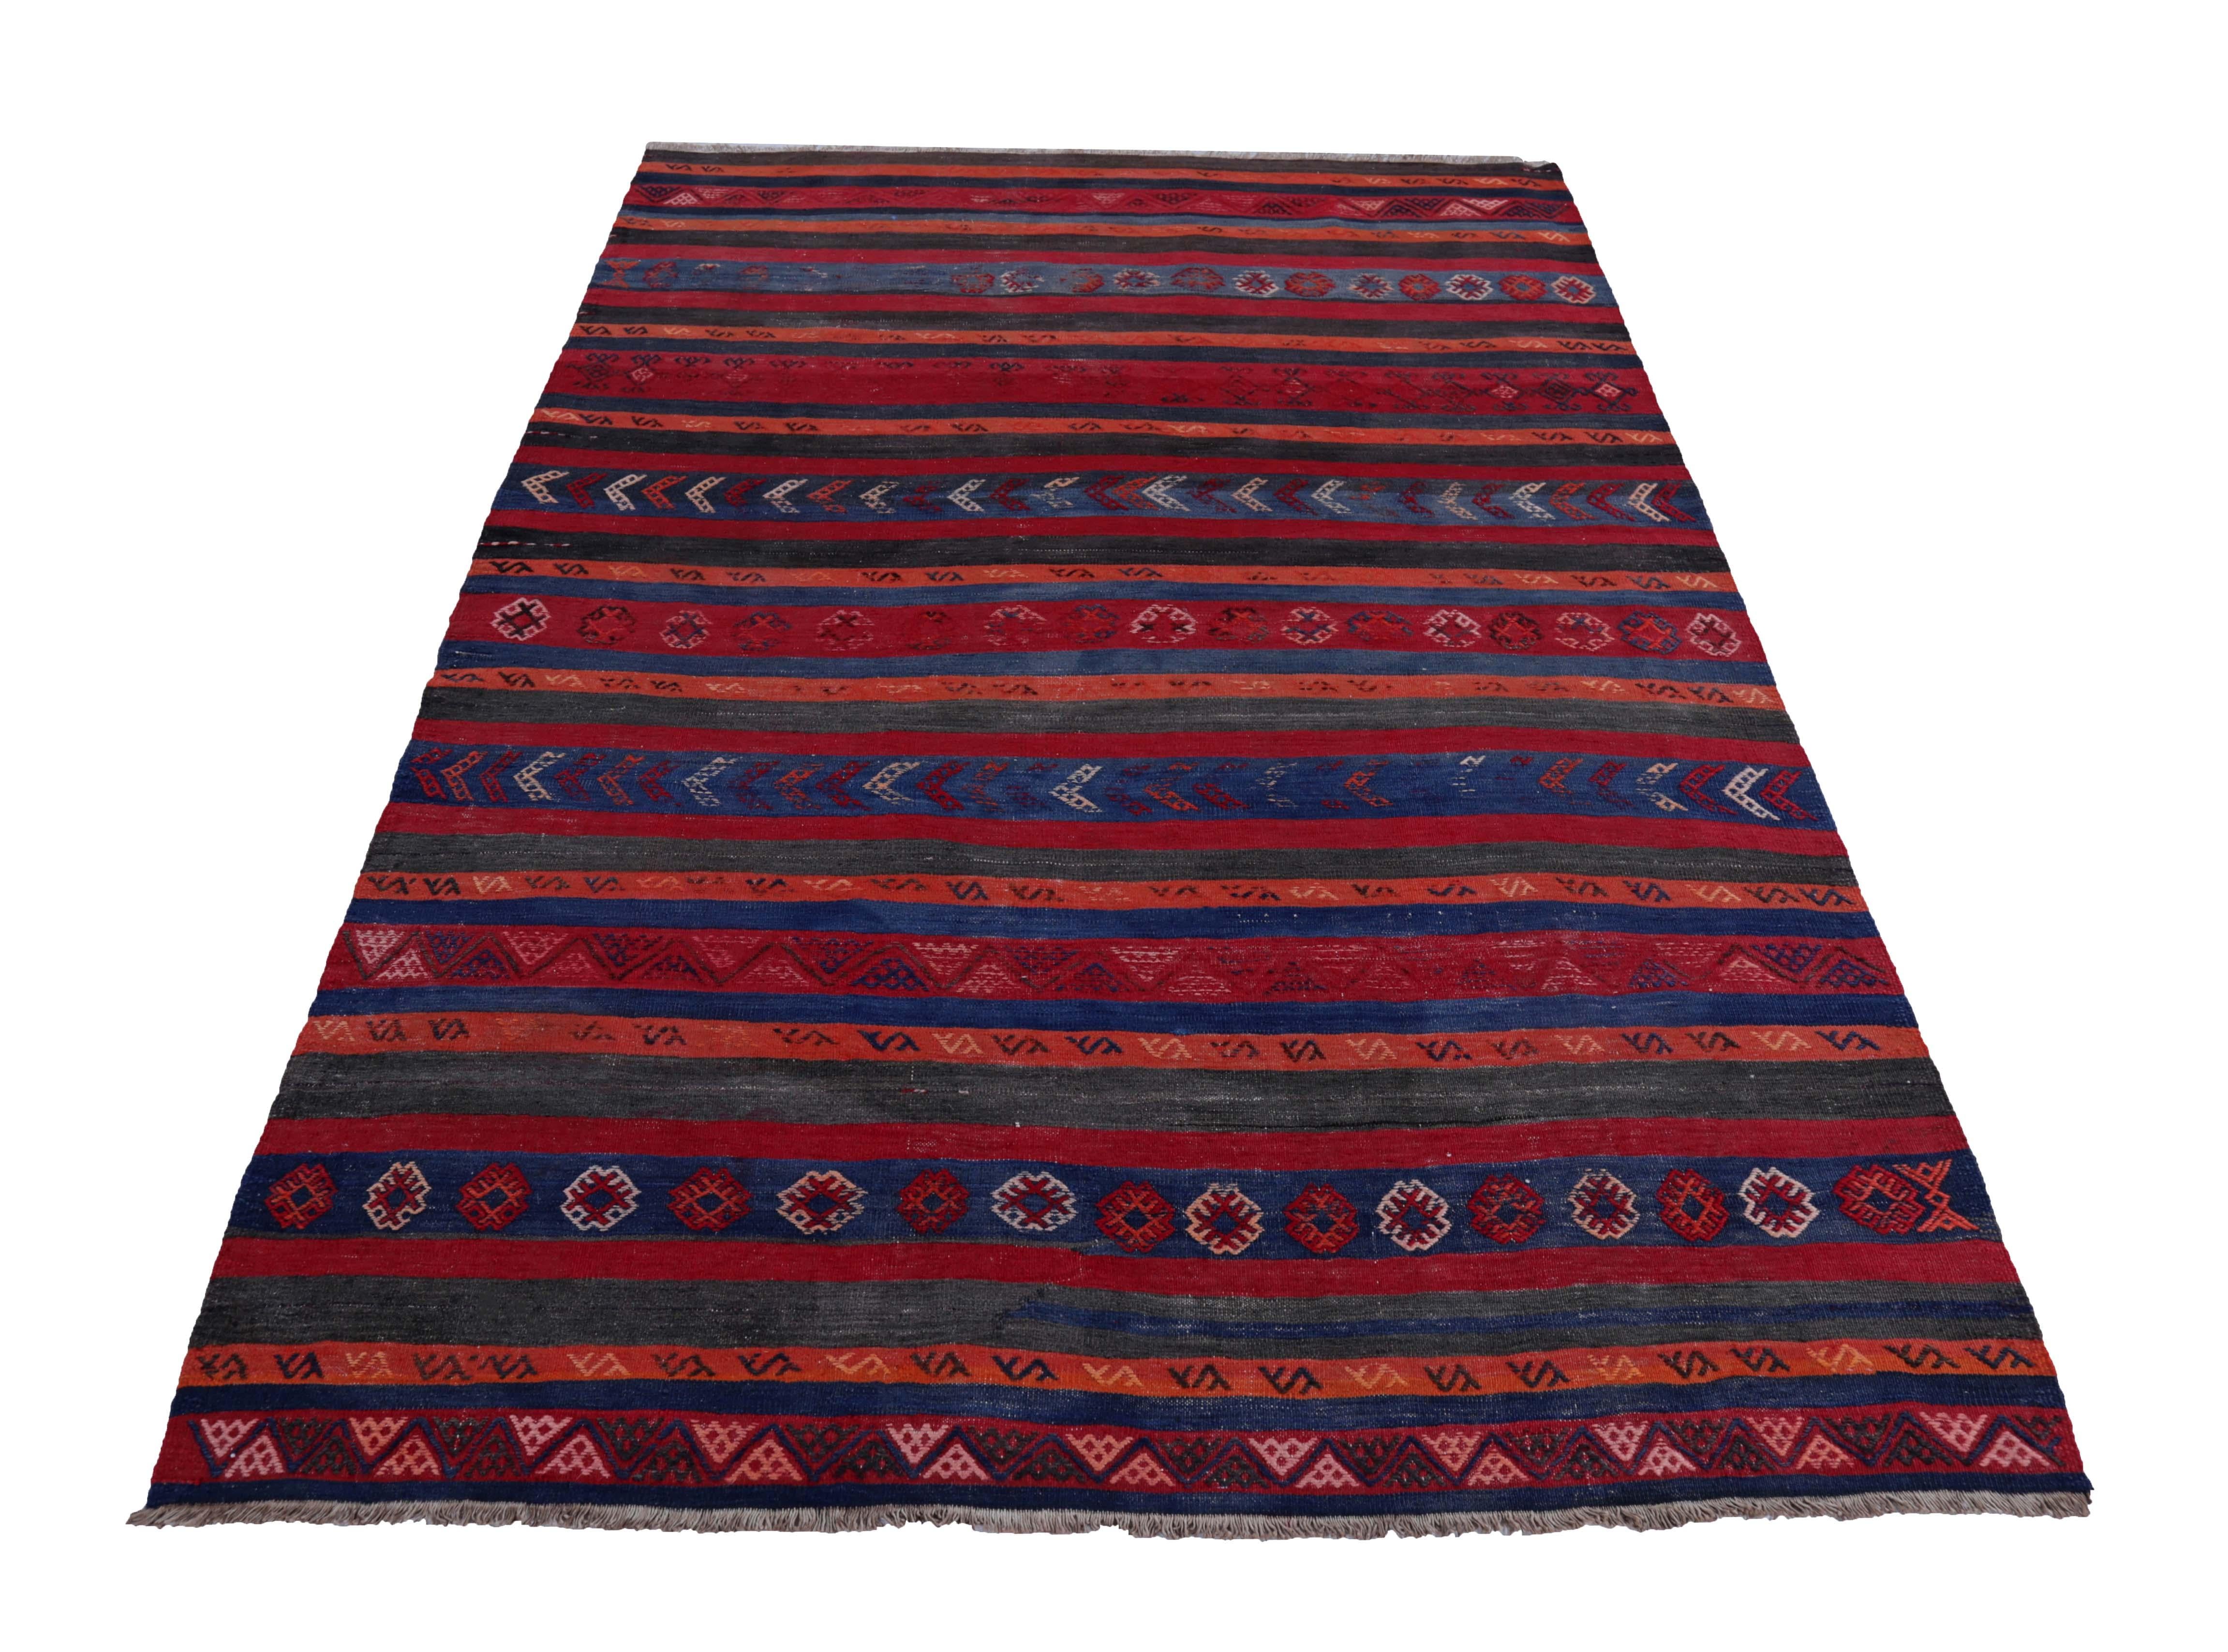 Turkish rug handwoven from the finest sheep’s wool and colored with all-natural vegetable dyes that are safe for humans and pets. It’s a traditional Kilim flat-weave design featuring red, blue and orange stripes with tribal design patterns. It’s a